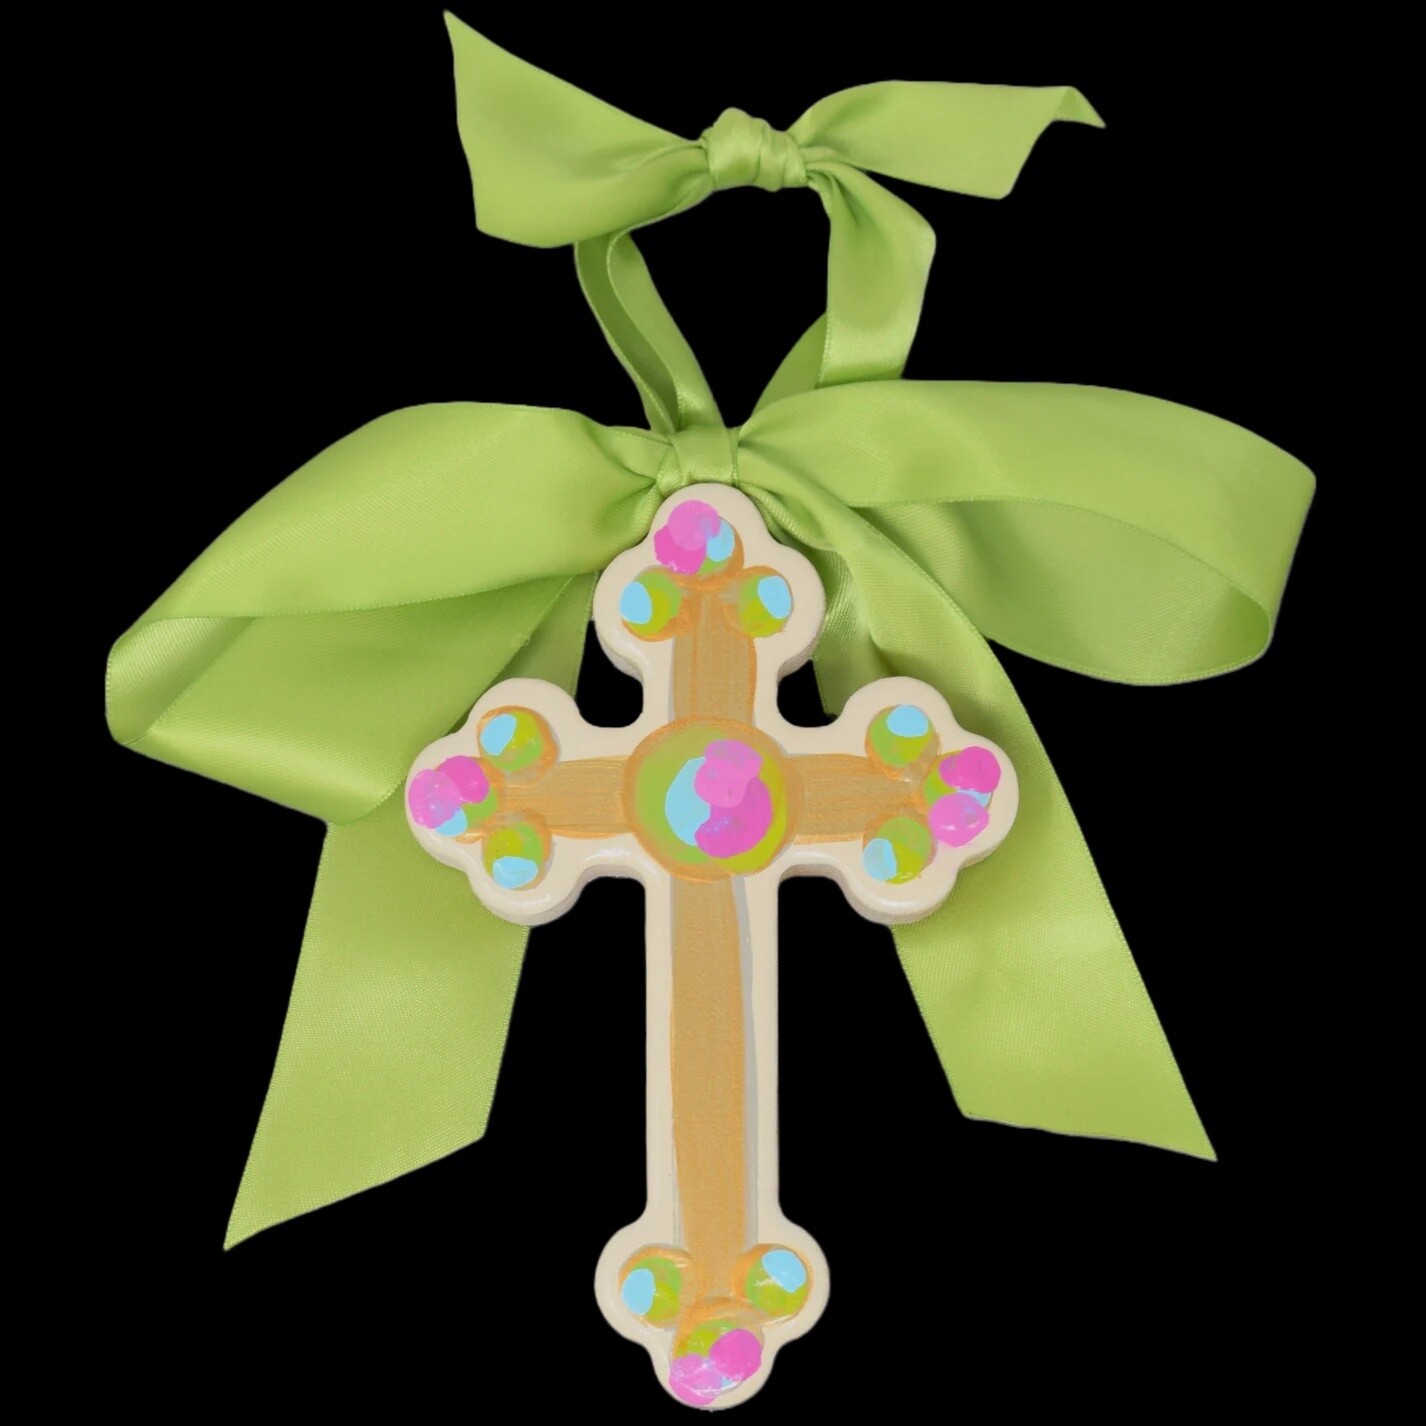 Have Mercy Gifts Mercy Cross-6"